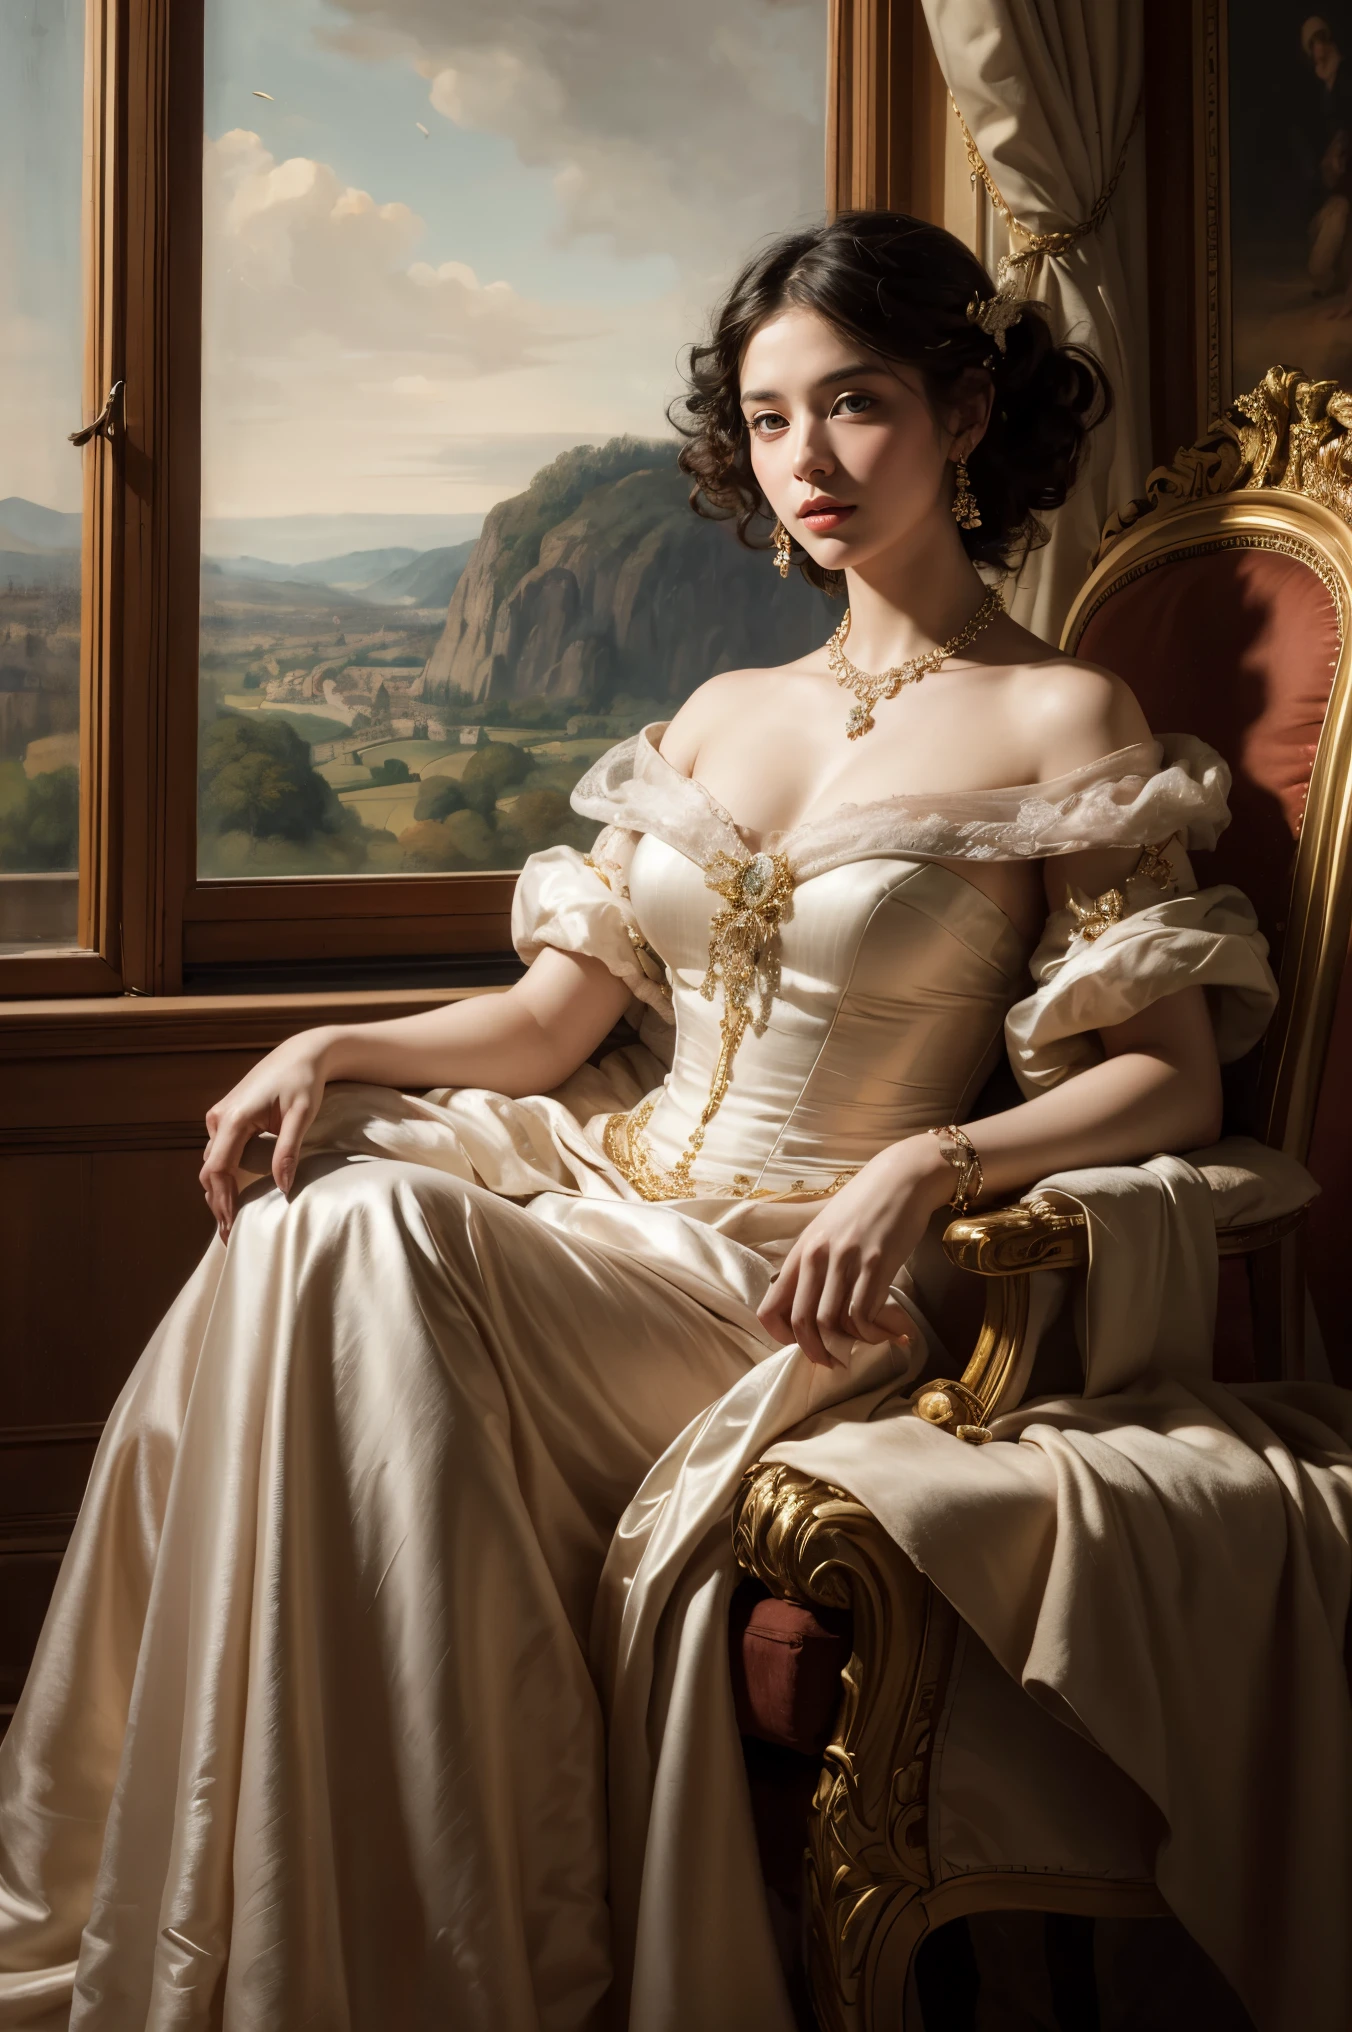 A realistic painting depicting a graceful woman in a luxurious dress, against the backdrop of a beautiful landscape. The art is in the style of Rembrandt and Peter Paul Rubens, with detailed curls and soft lighting. (Long angle), 4k resolution, romantic motif.